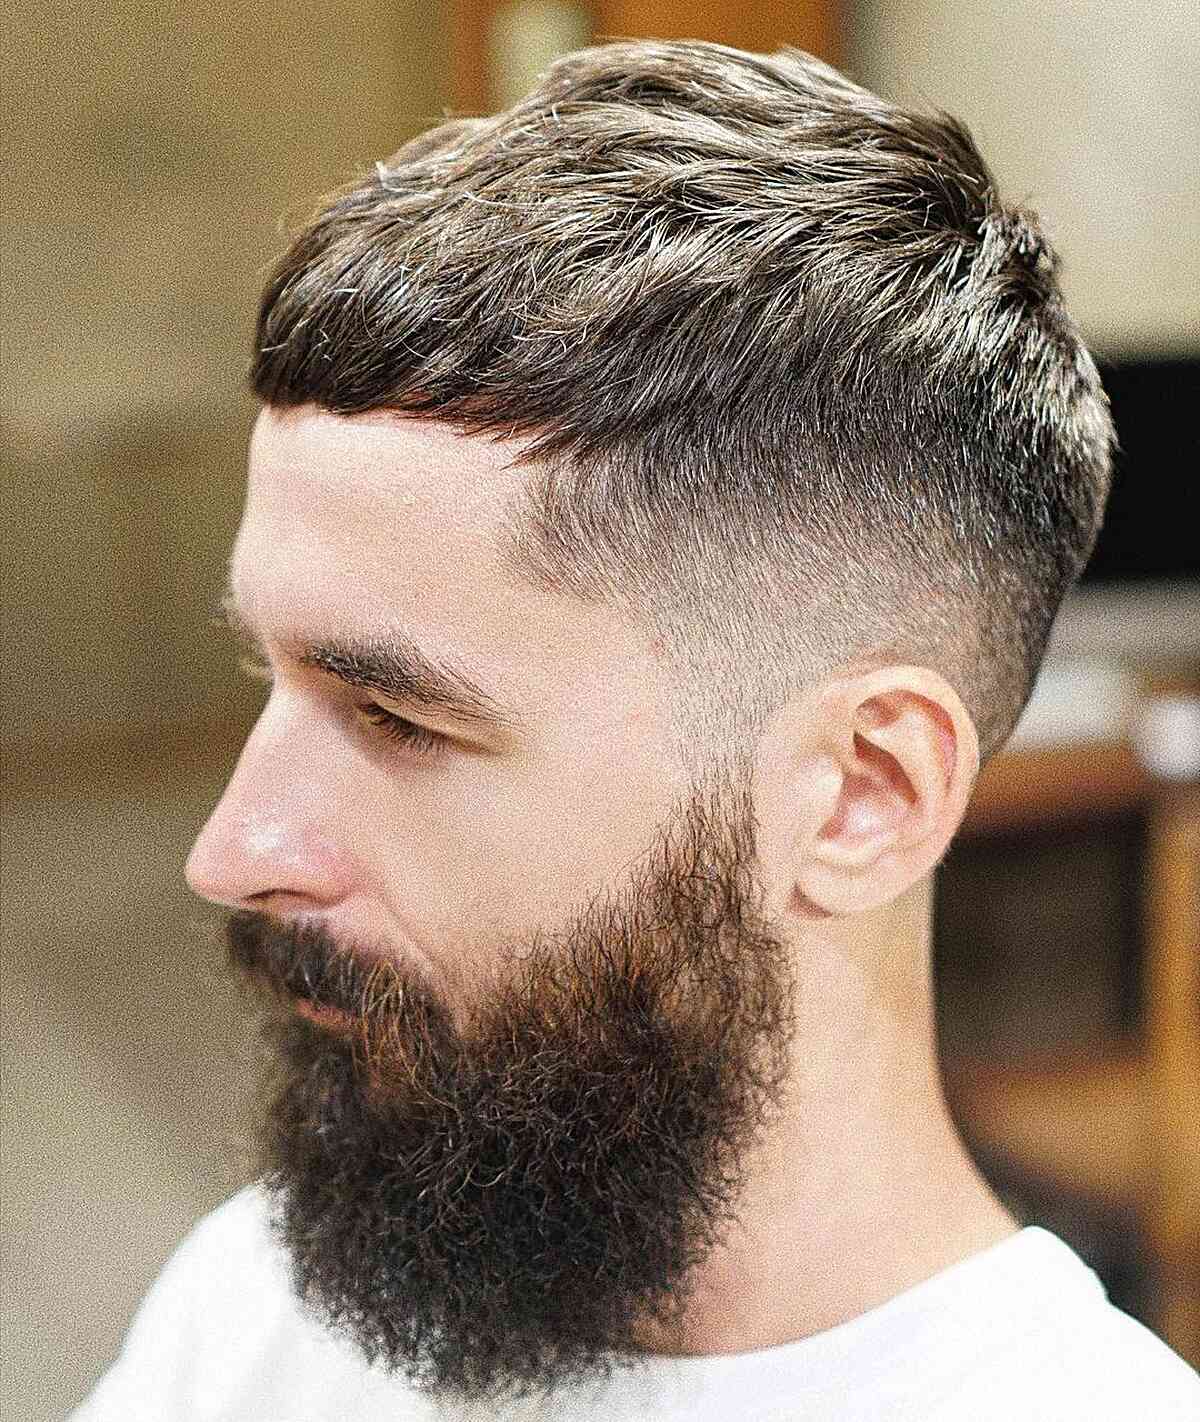 Classic Messy French Crop with Beard for dudes